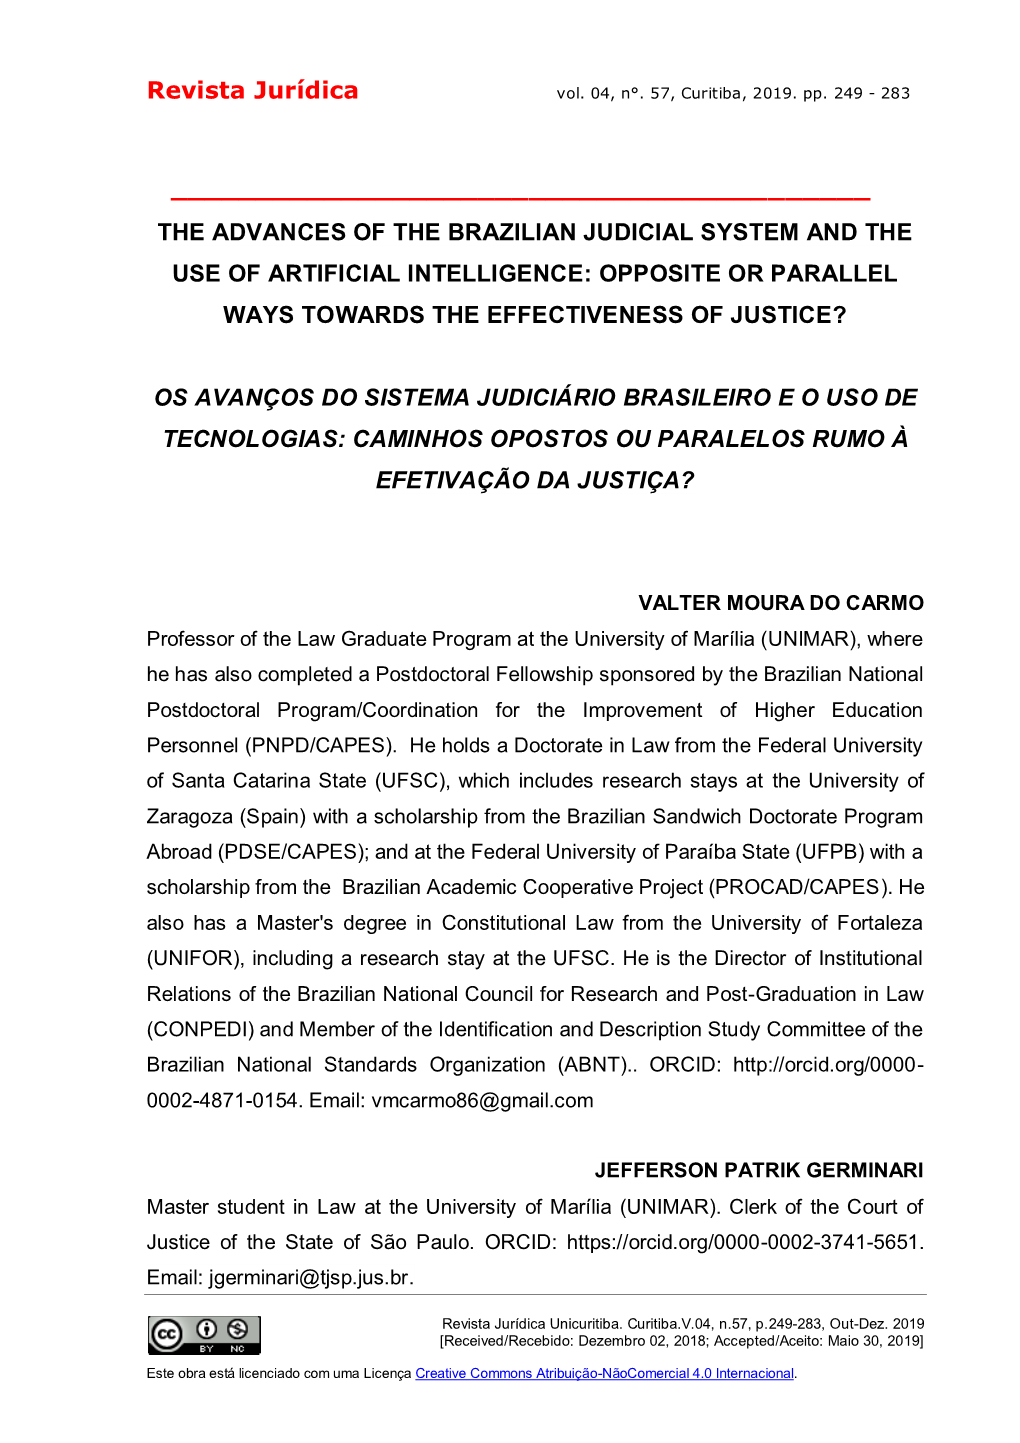 Revista Jurídica the ADVANCES of the BRAZILIAN JUDICIAL SYSTEM and the USE OF